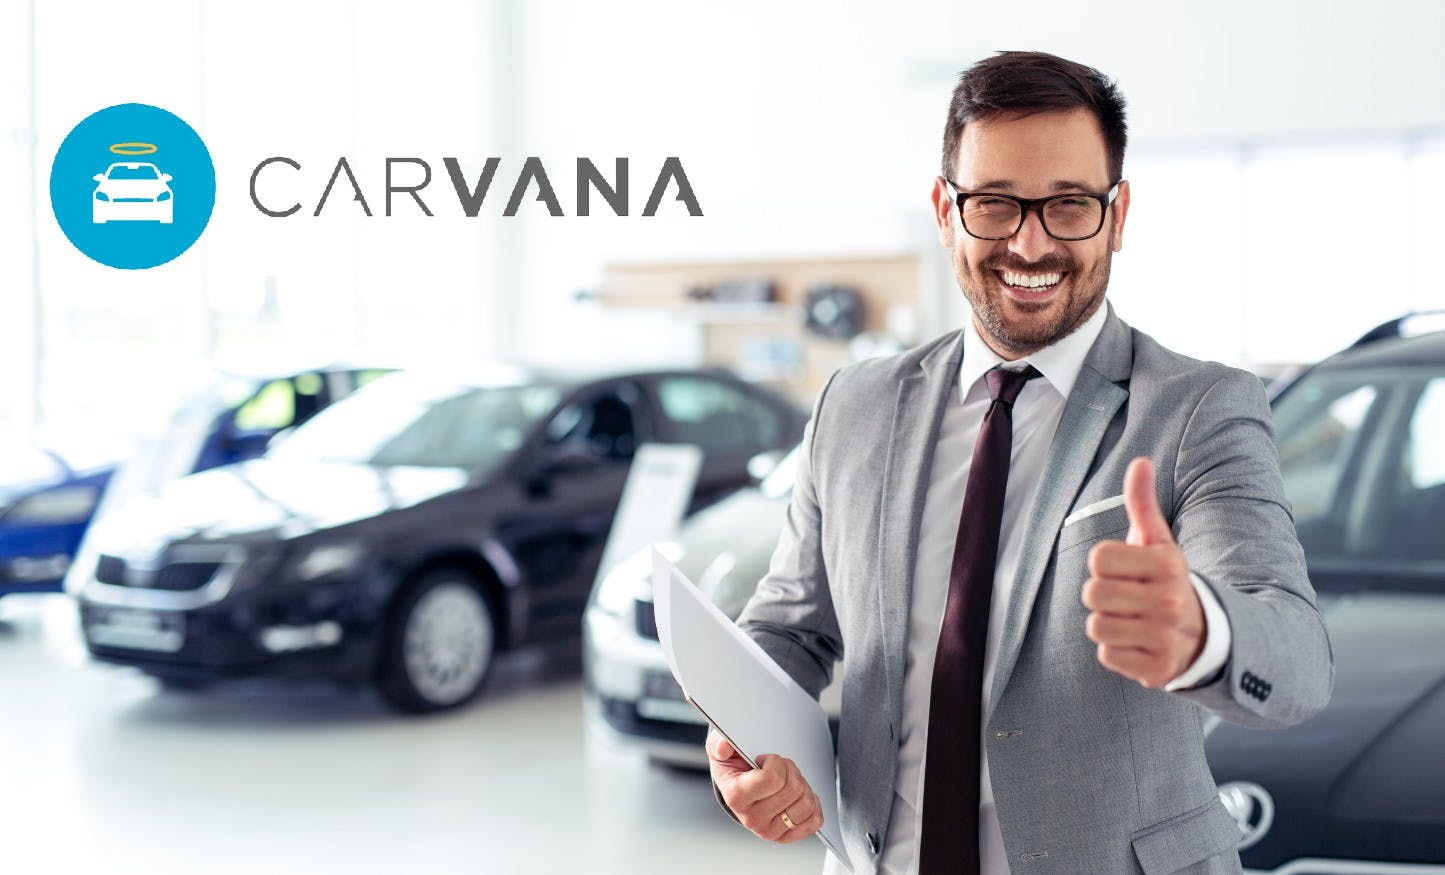 Carvana Car Dealership Review: Financing Options, Locations, Features, and More!